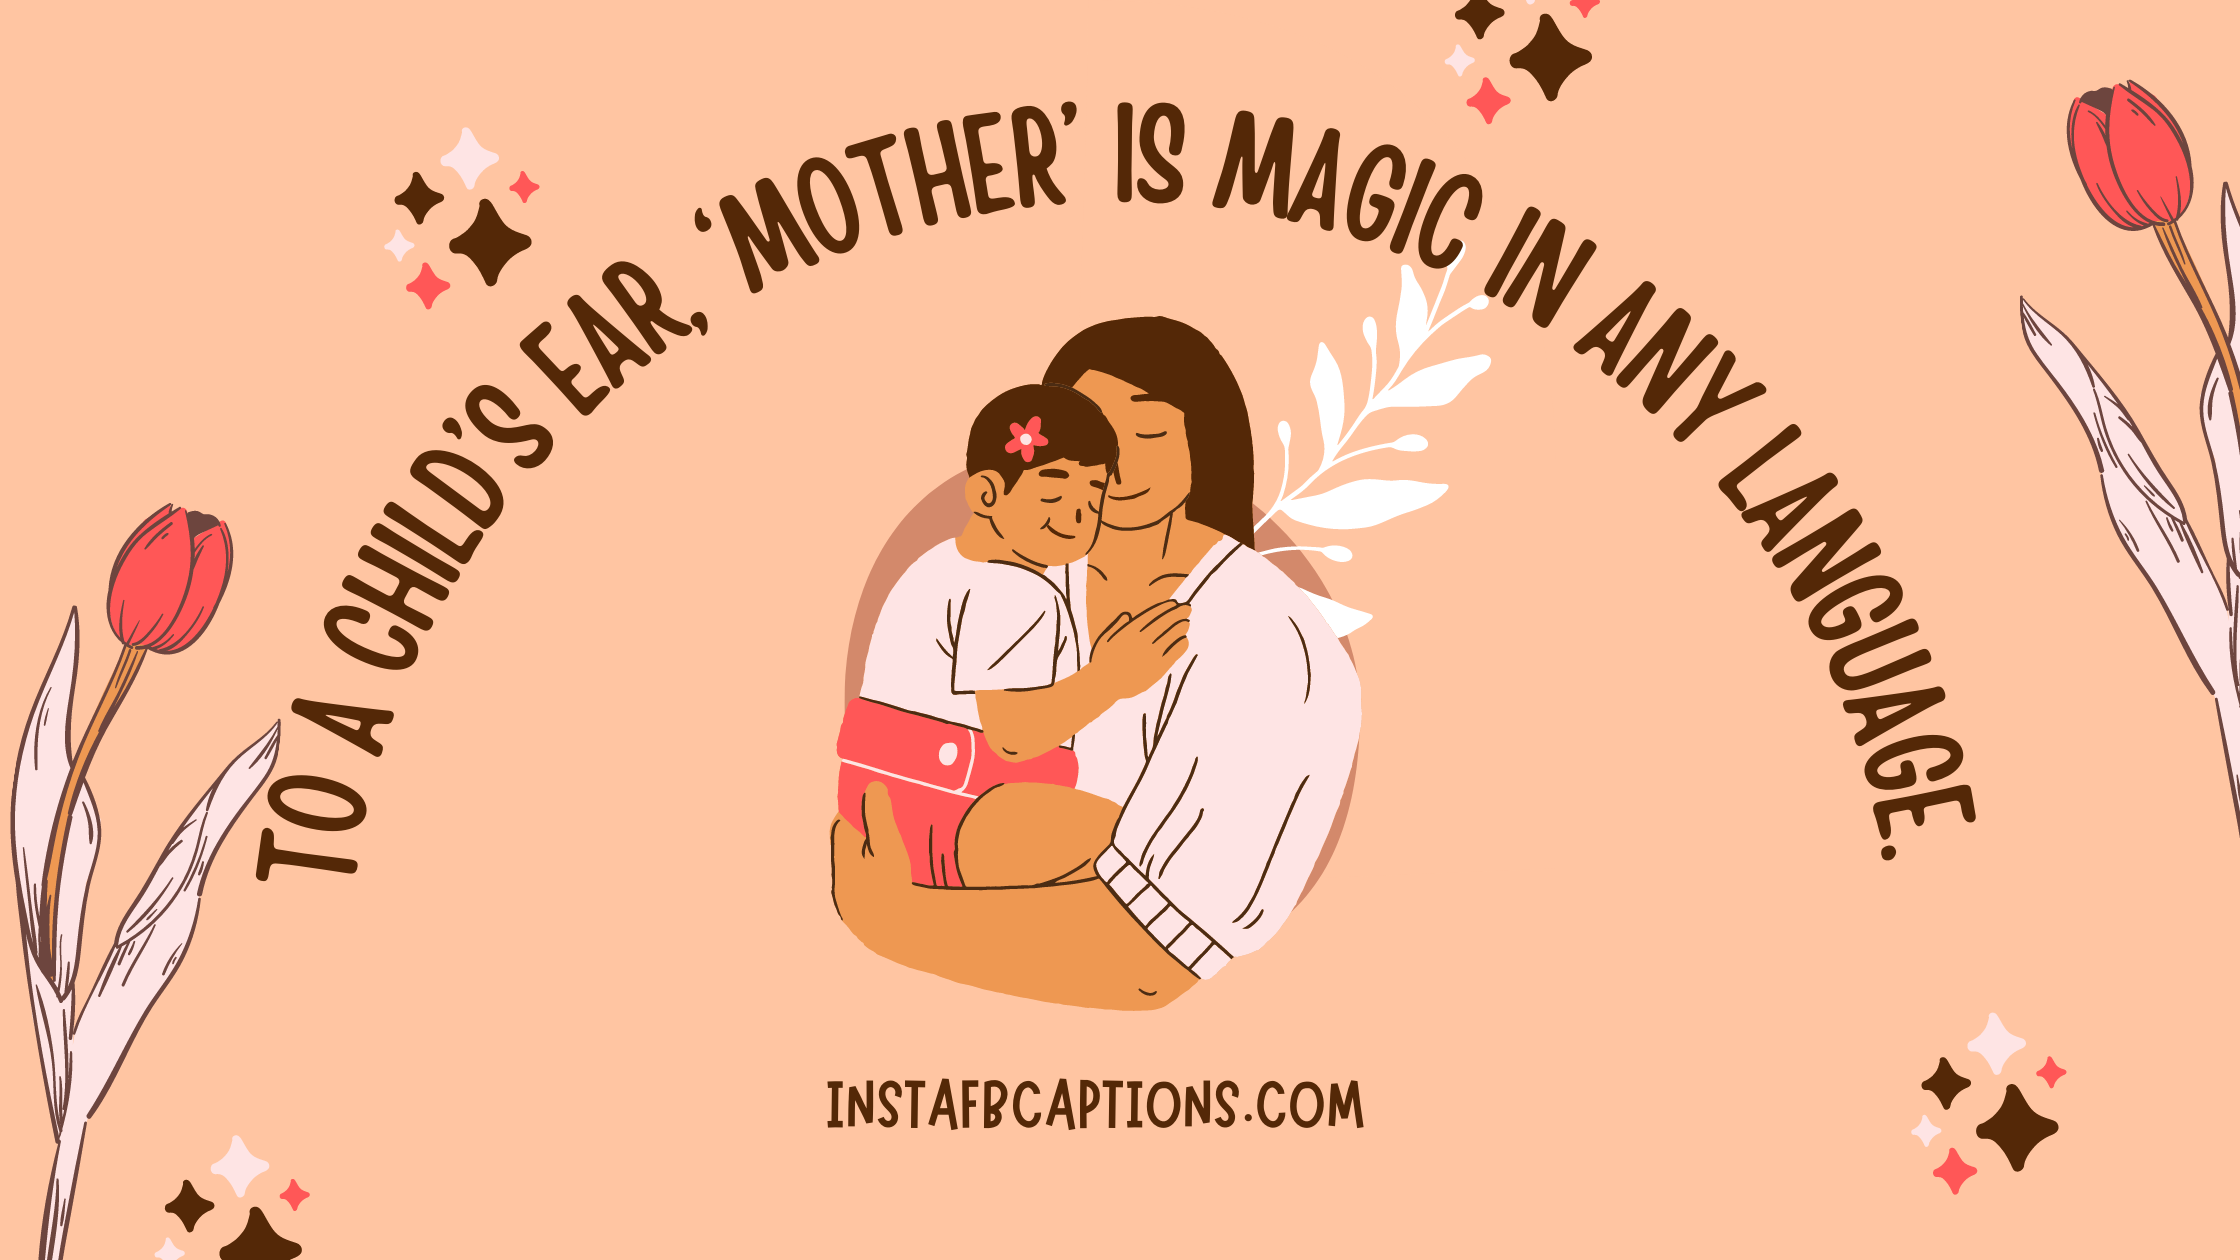 Inspiring Captions For Your Mother  - Inspiring Captions for your Mother - Mother&#8217;s Day Captions: Express Your Love and Gratitude on Instagram